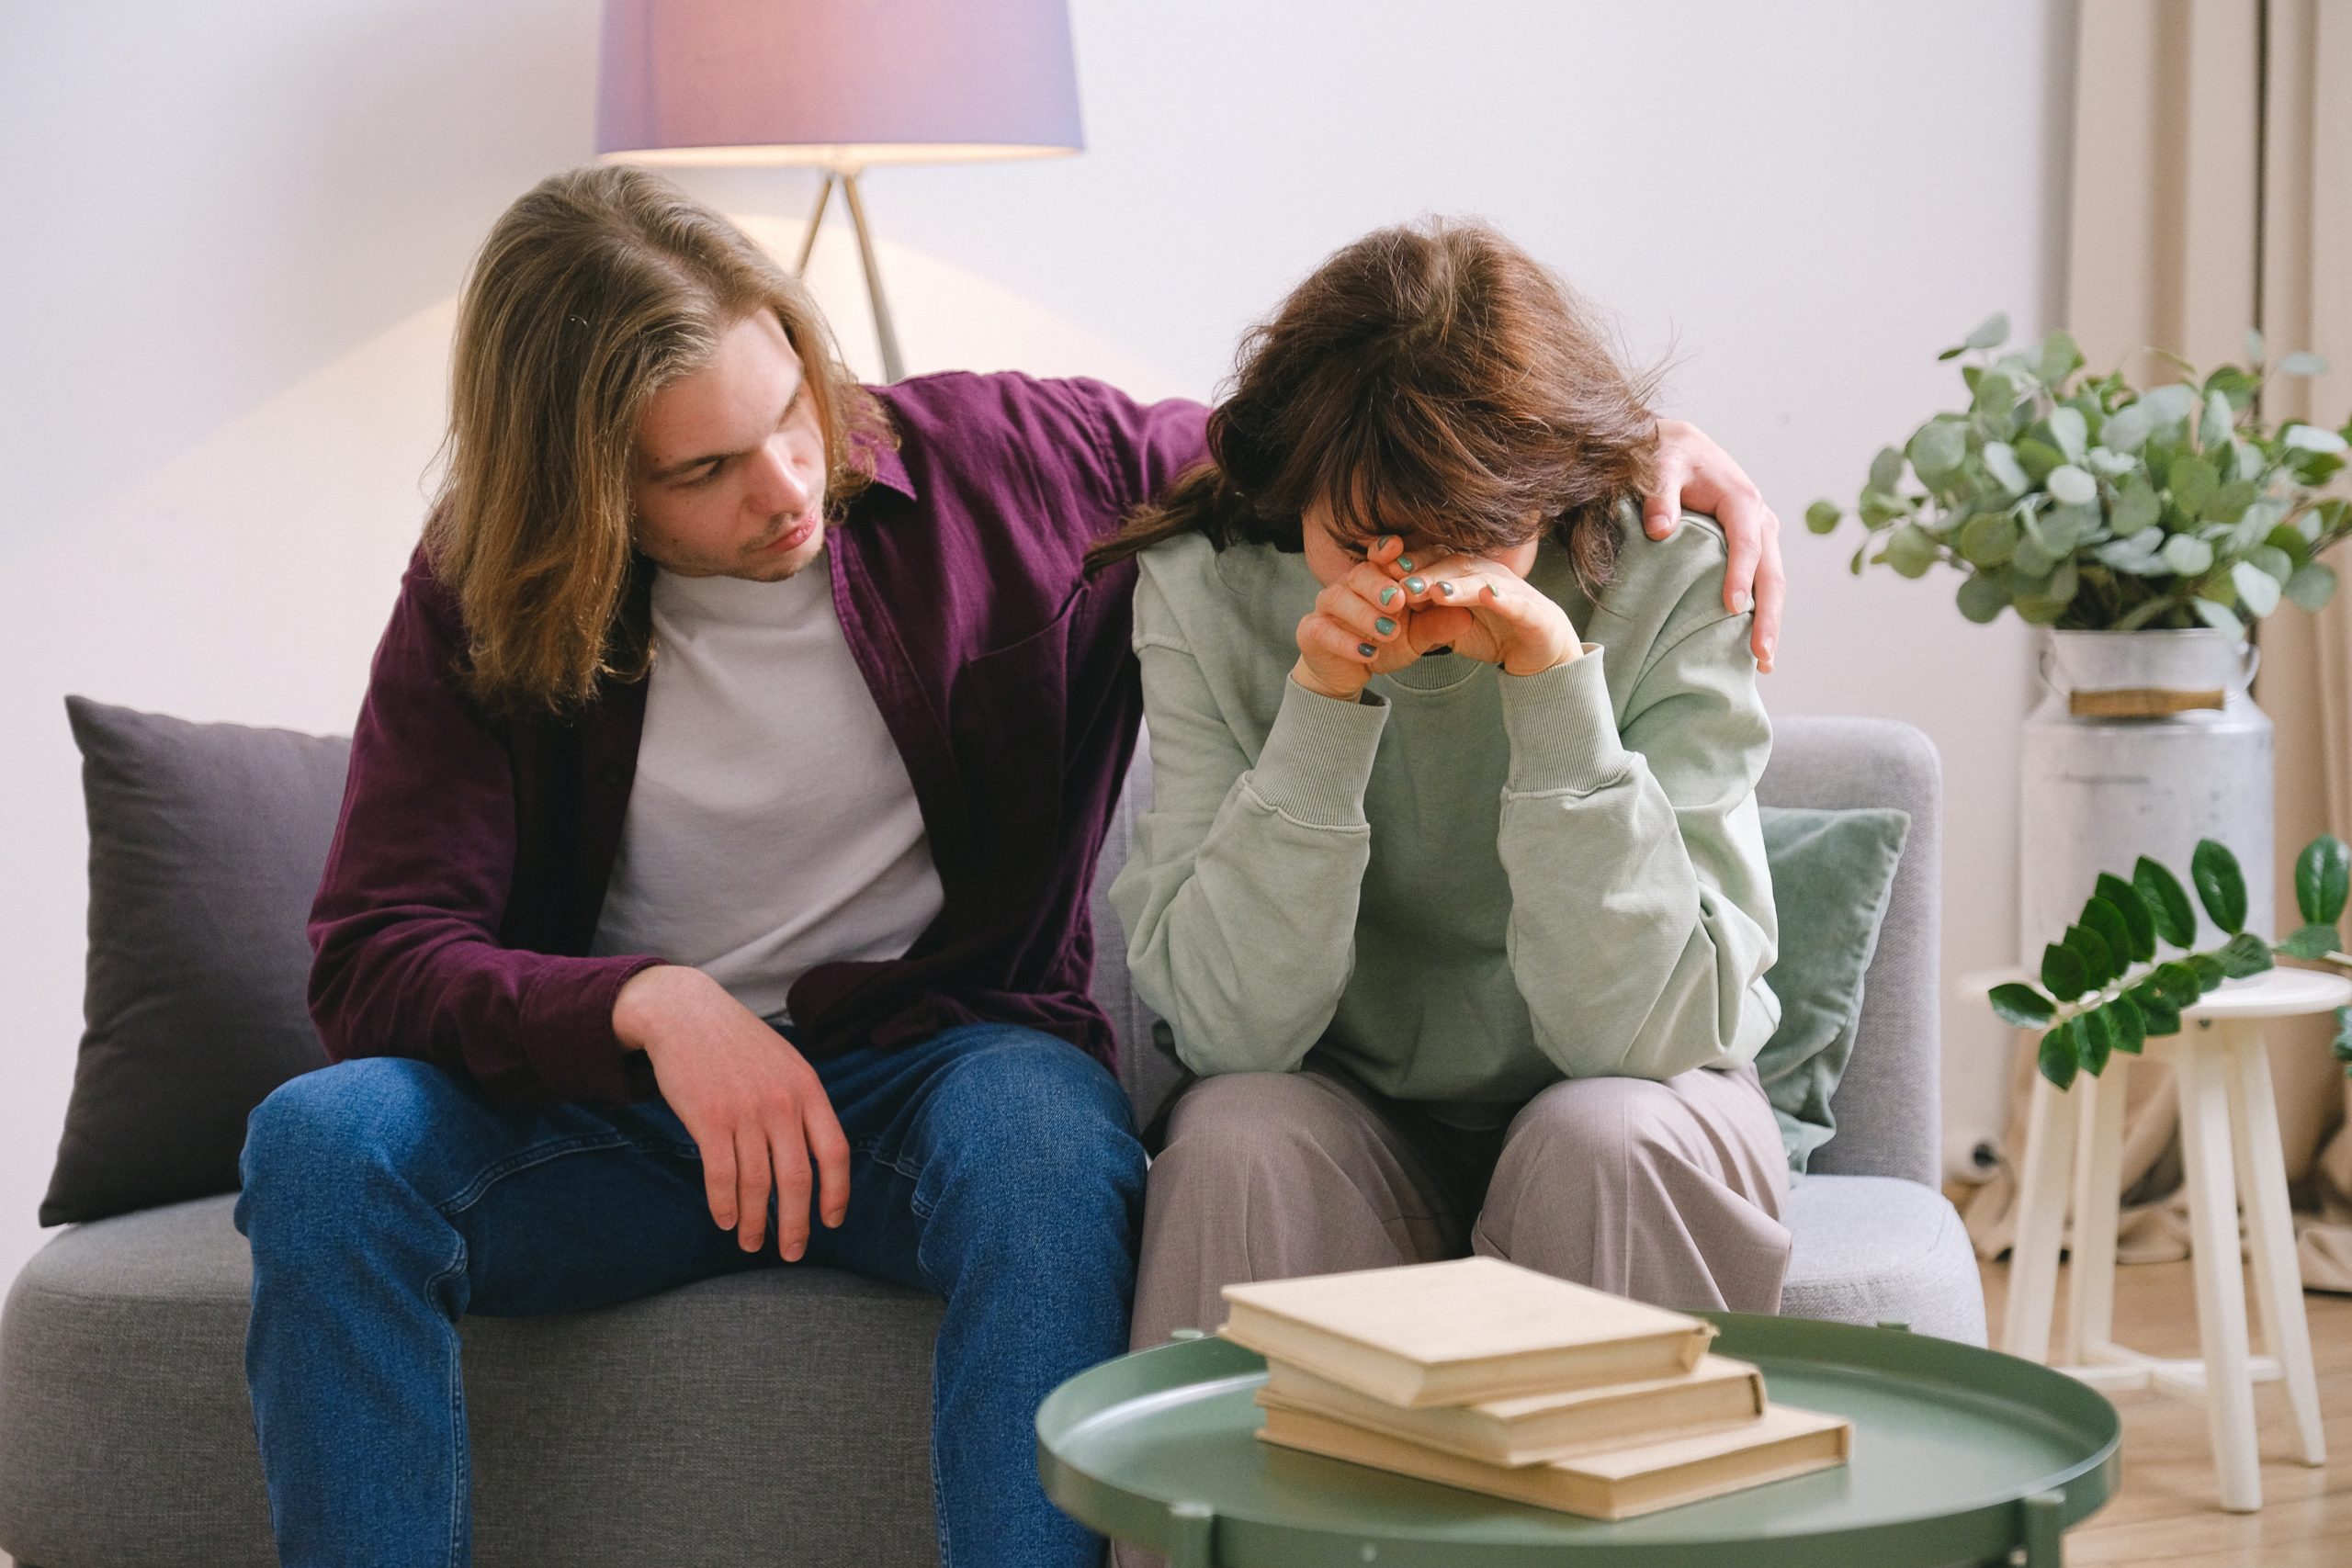 Young male comforting upset woman on a couch who had her hands covering her face